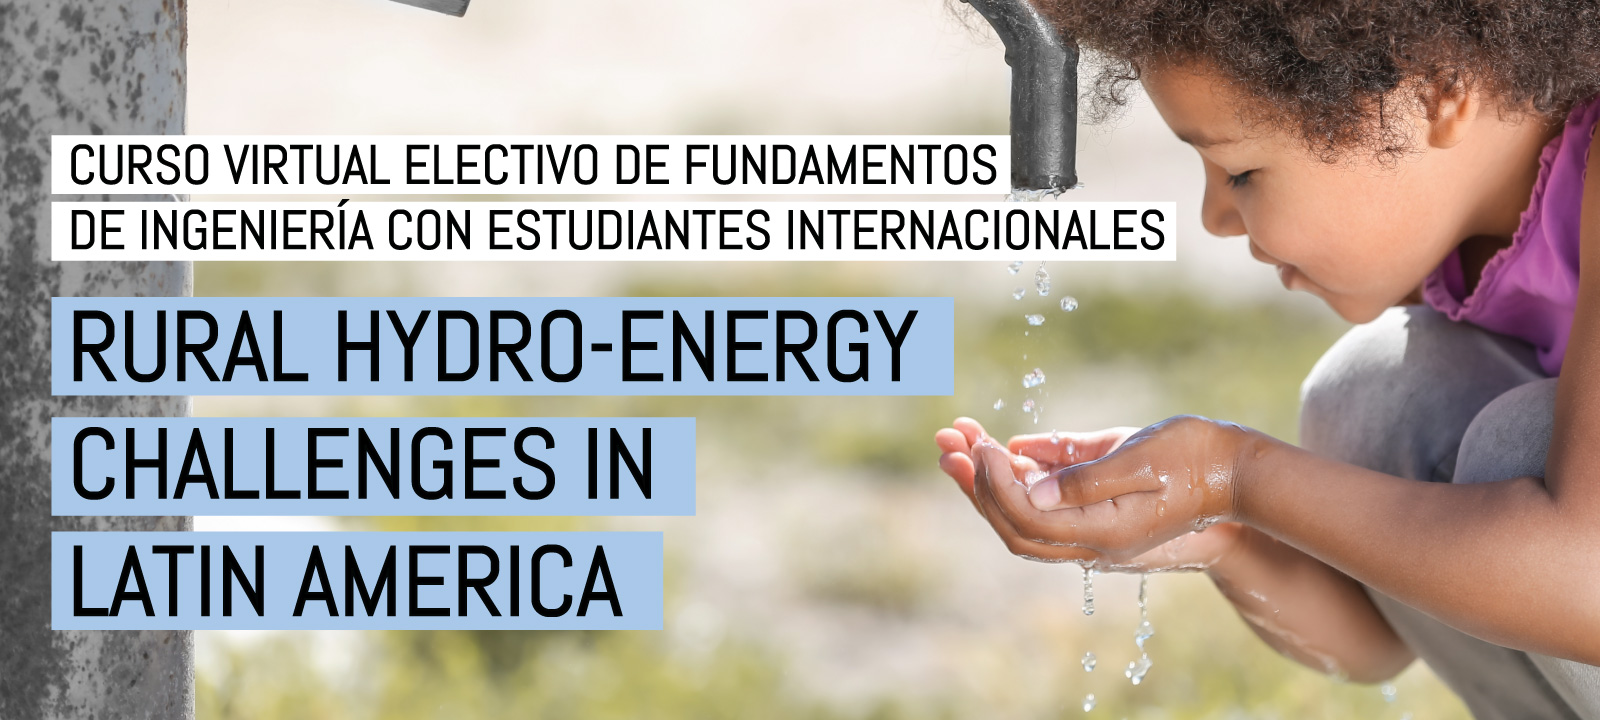 Curso virtual | Rural Hydro-Energy Challenges in Latin America